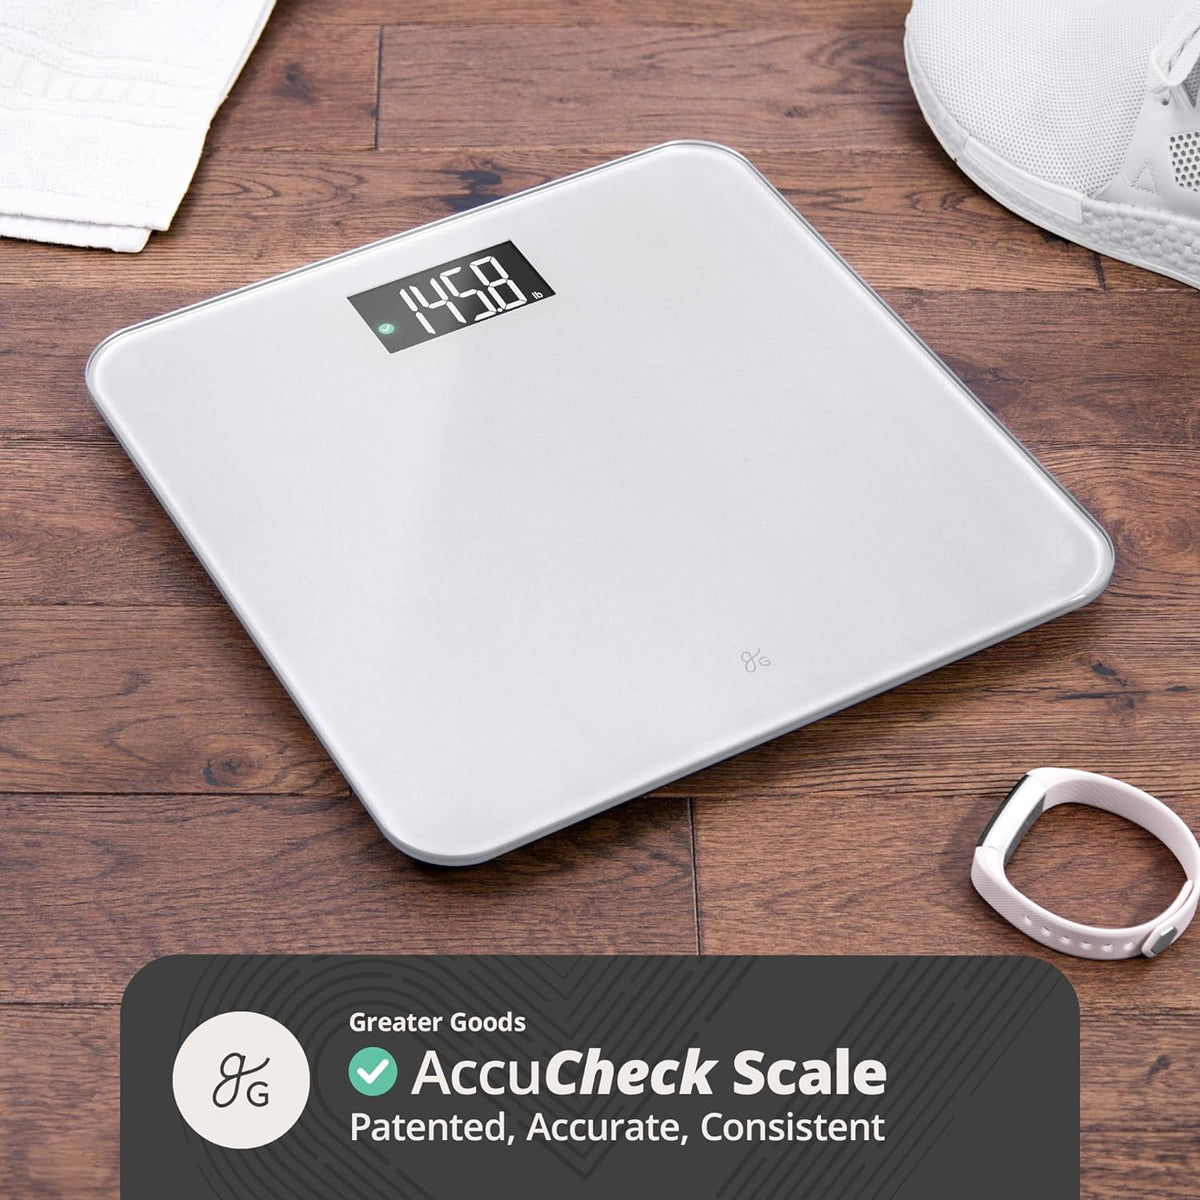 Greater Goods Bathroom Scale with Accucheck and Kitchen Scale, Gray/Black Glass Bundle